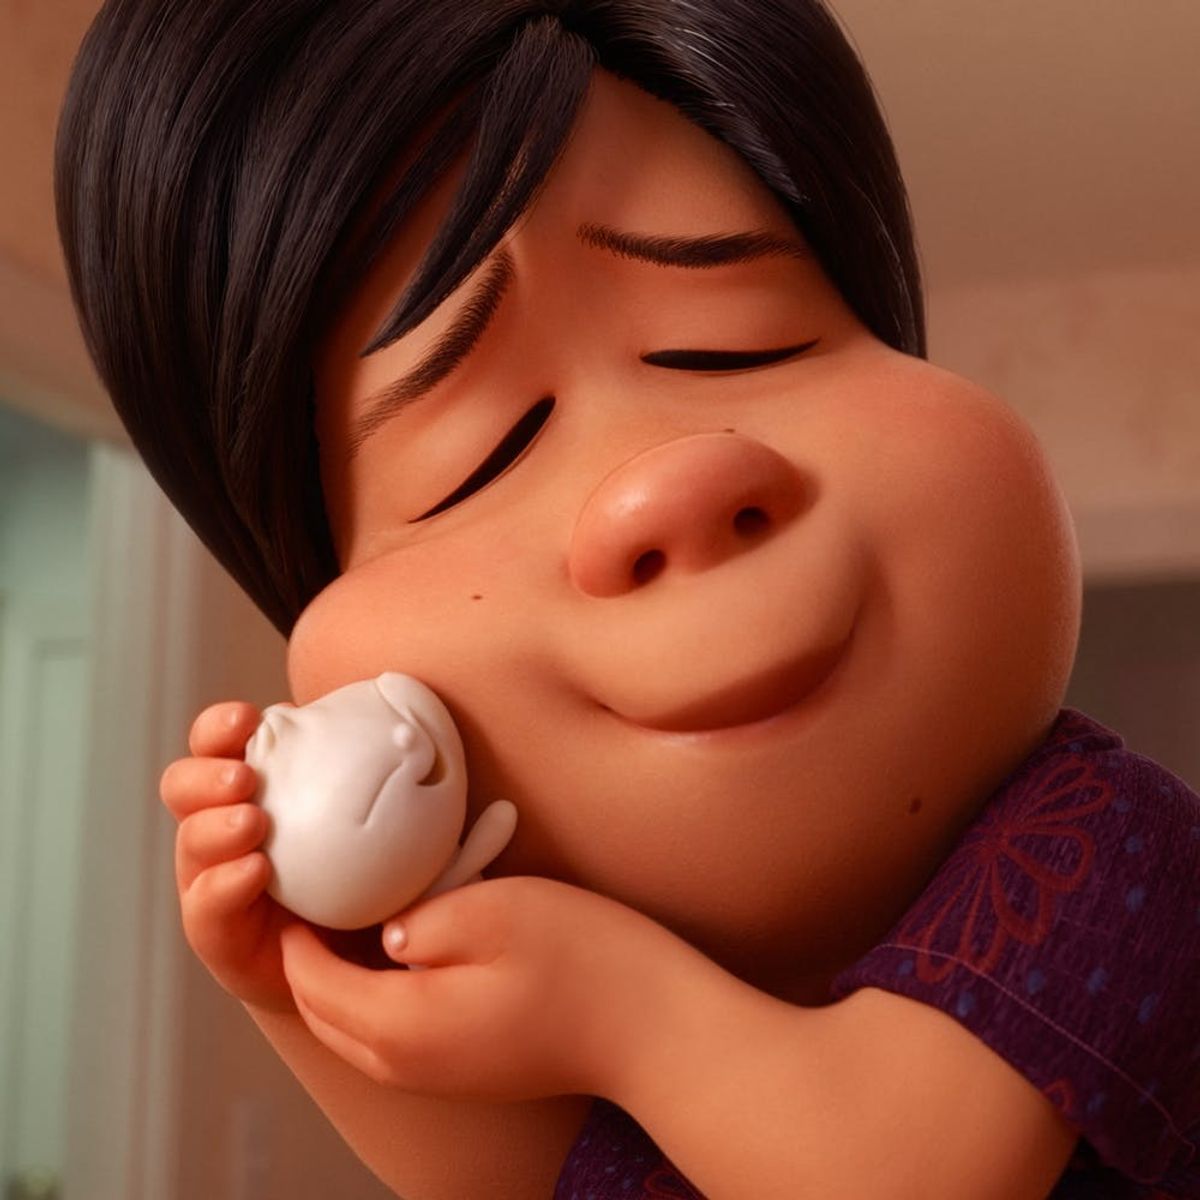 Pixar Just Gave Us a First Taste of Its Adorable New Short, ‘Bao’